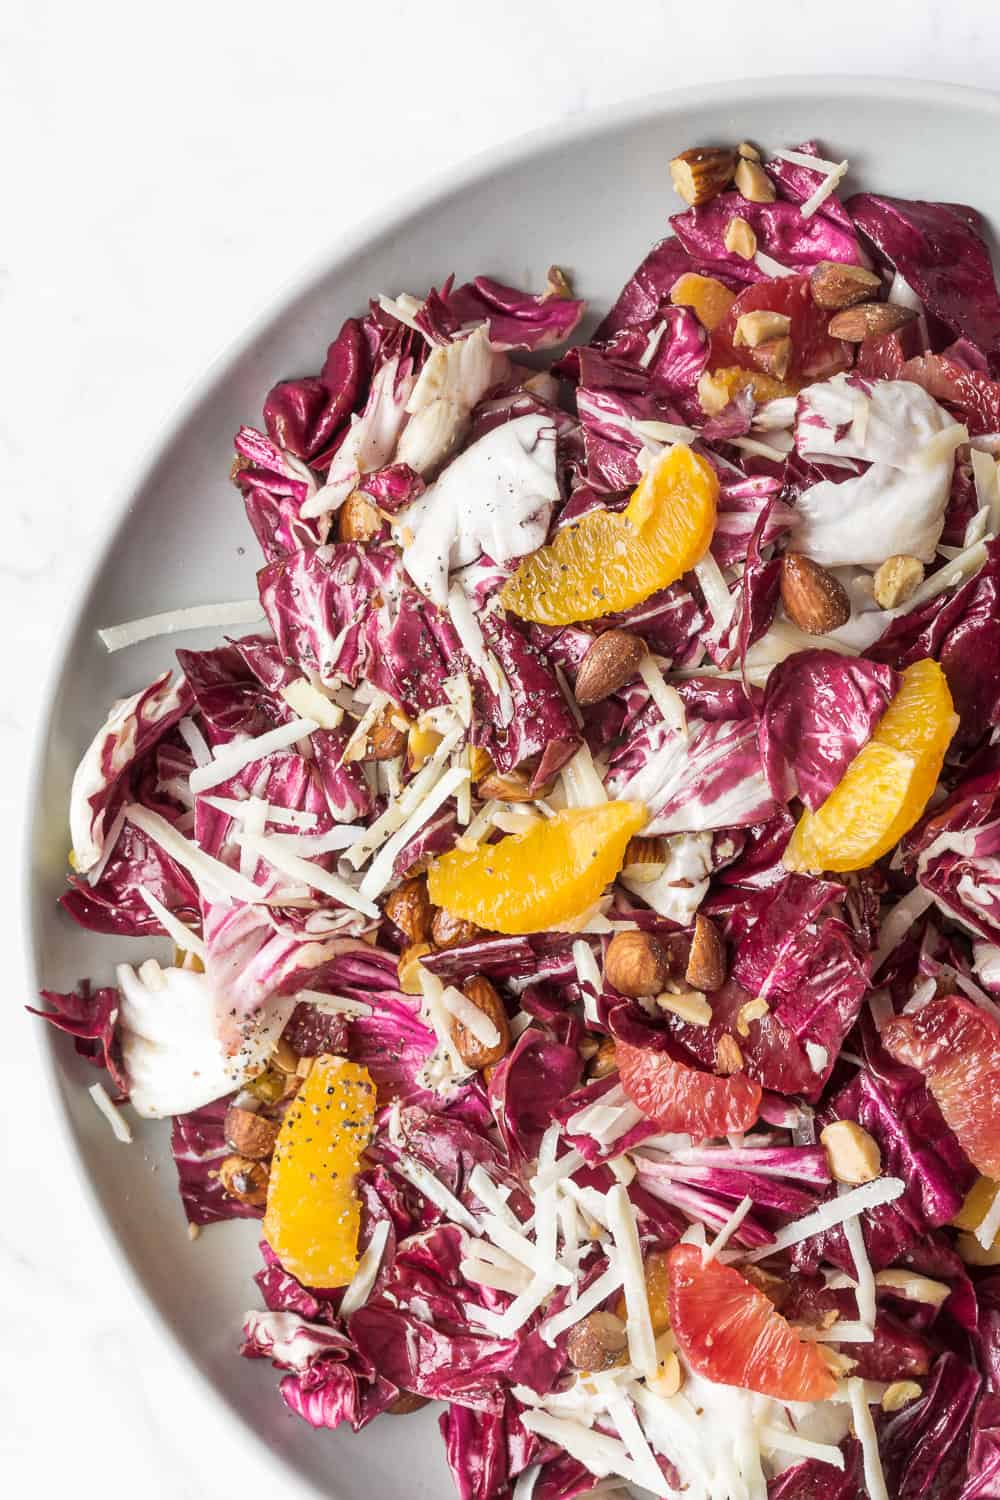 Overhead close-up view of radicchio salad with oranges and pecorino placed on a white plate.